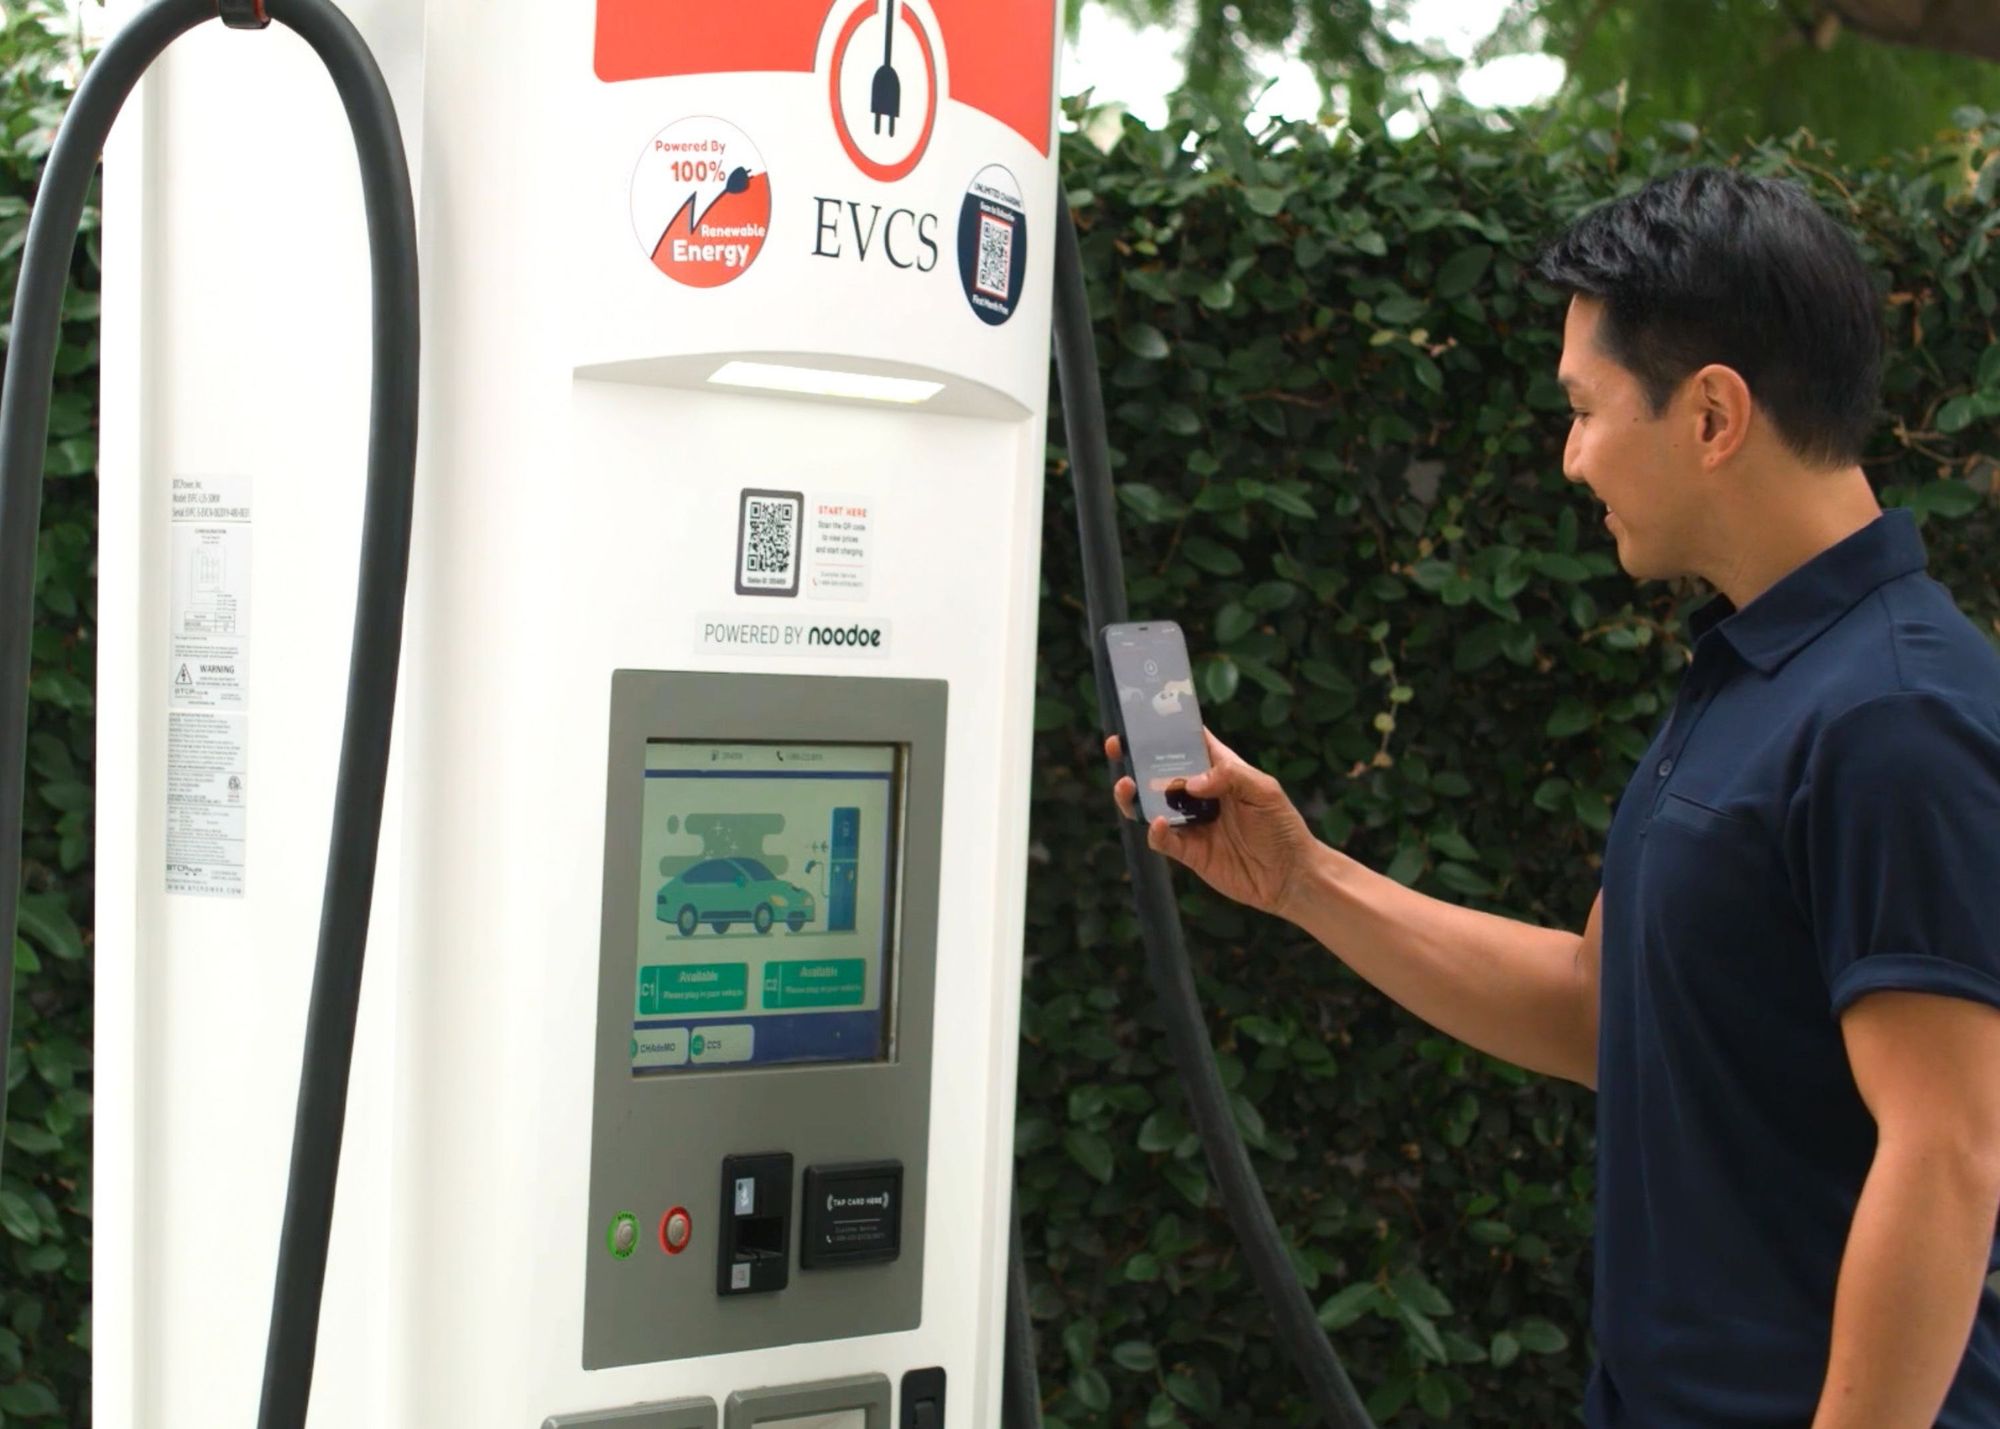  The new EVCS pricing includes new charging tiers giving access to previously excluded commercial drivers